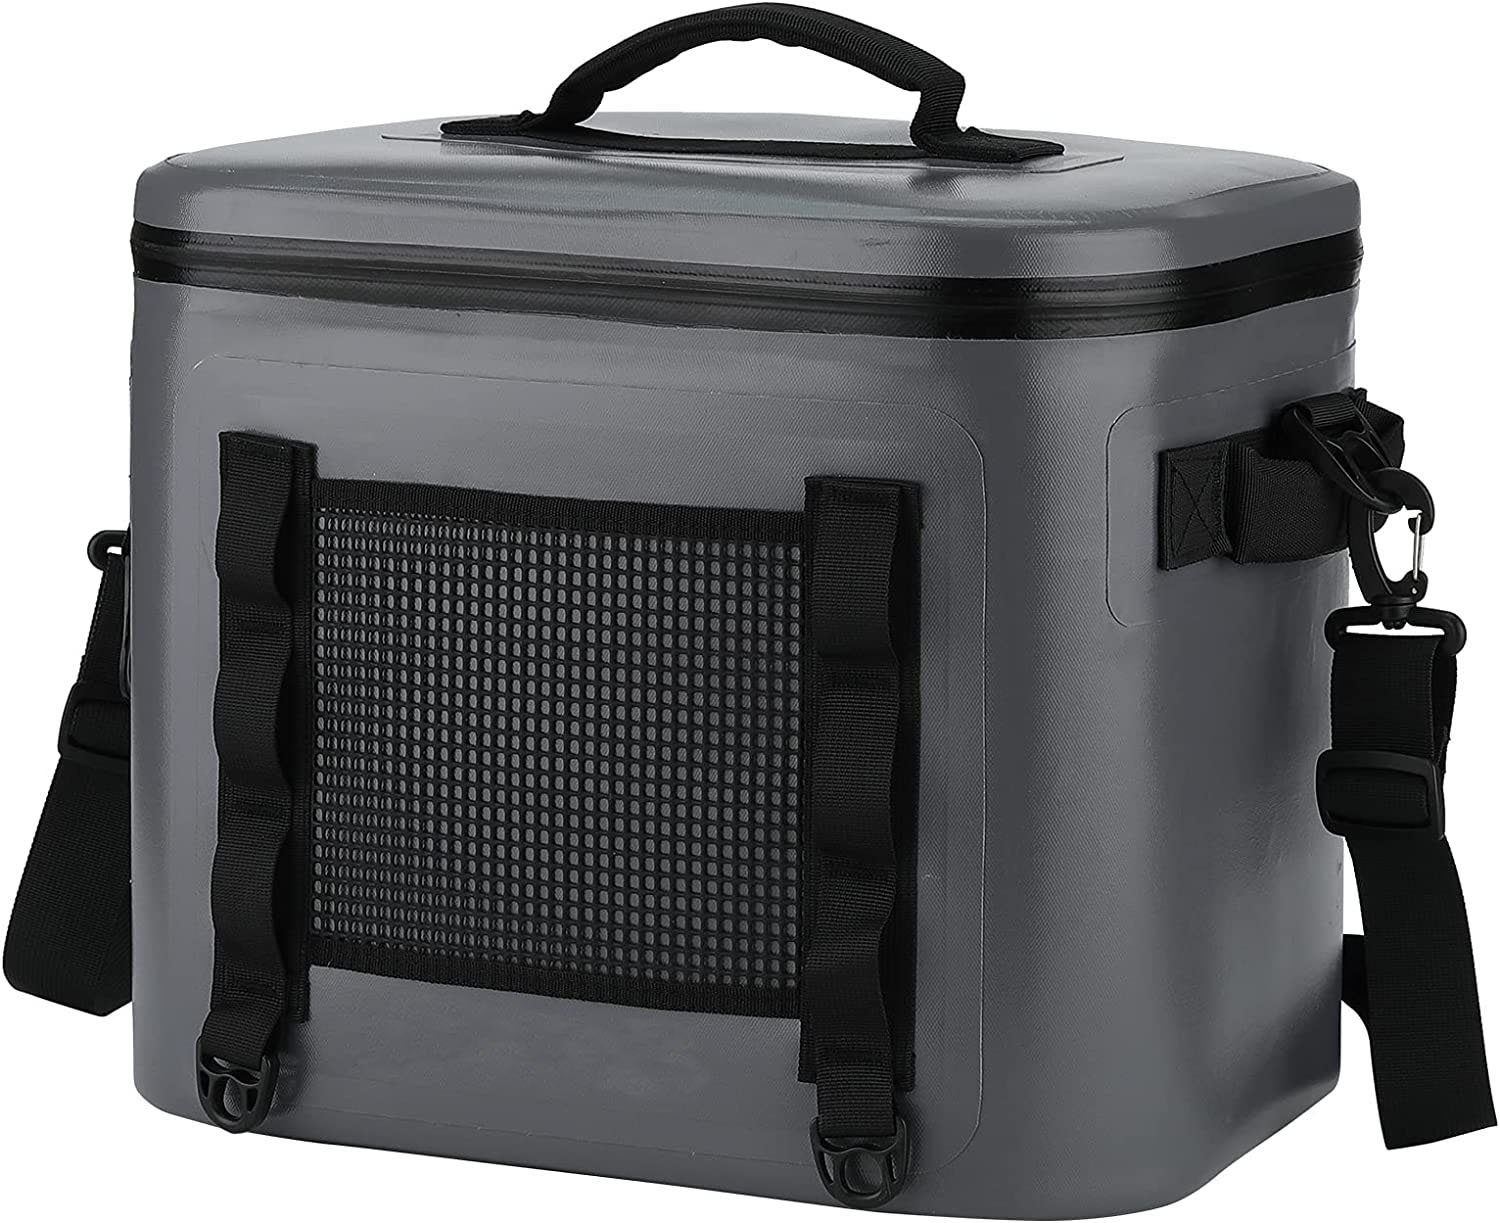 Soft Cooler Full can Keep ice Cubes for 60 Hours Suitable for All Kinds of Outdoor Activities 